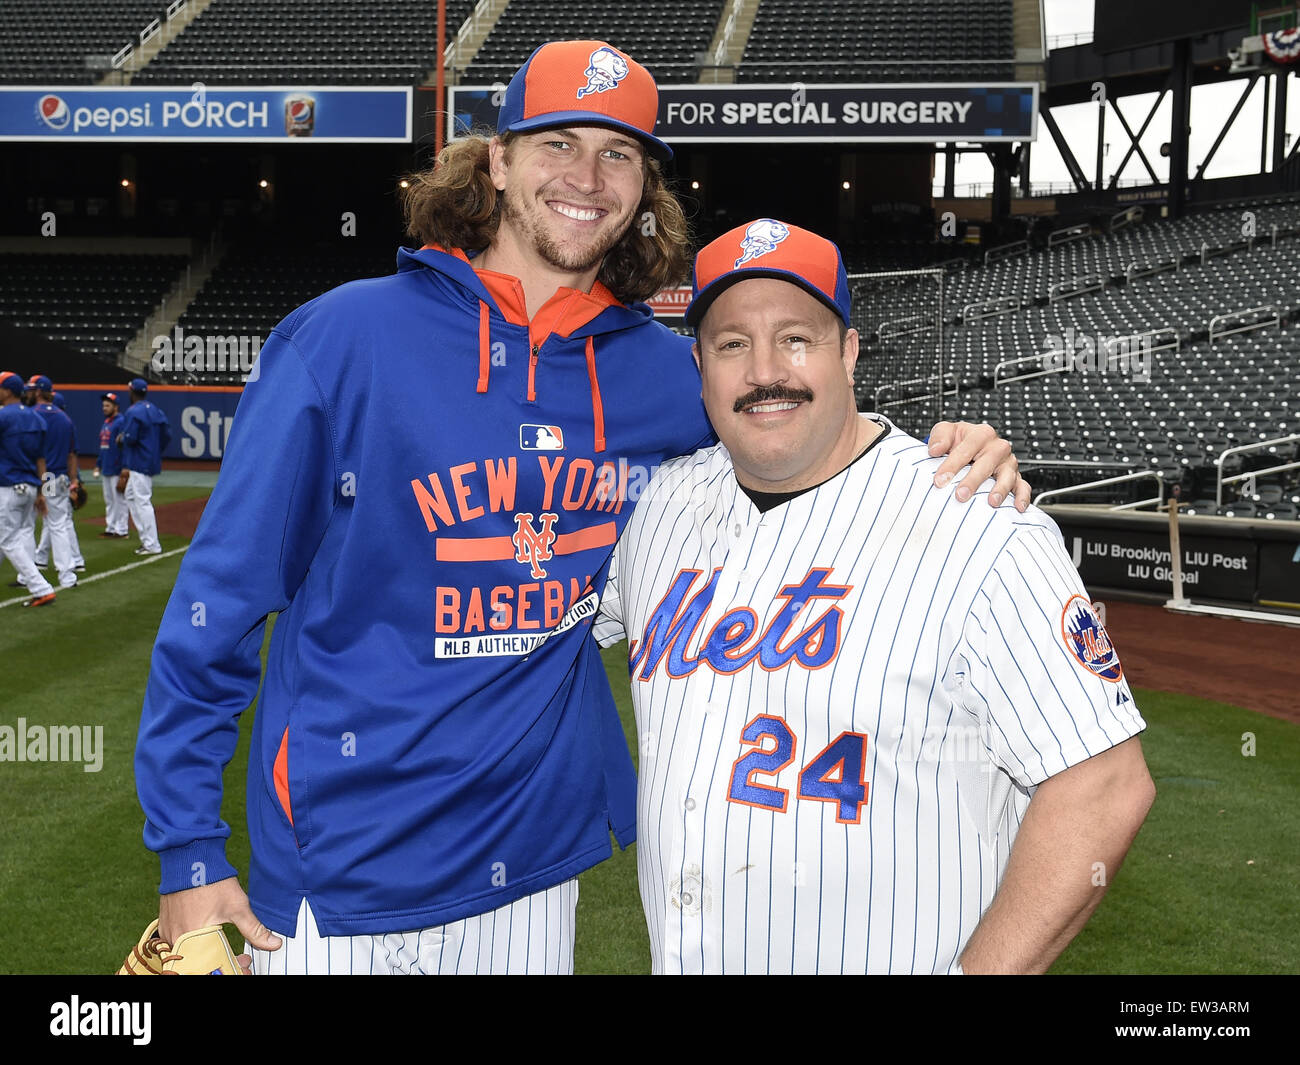 The King of Queens sitcom actor Kevin James, takes batting practice at Citi  Field stadium in Queens, the home baseball park of the New York Mets  Featuring: Kevin James, Jacob deGrom Where: